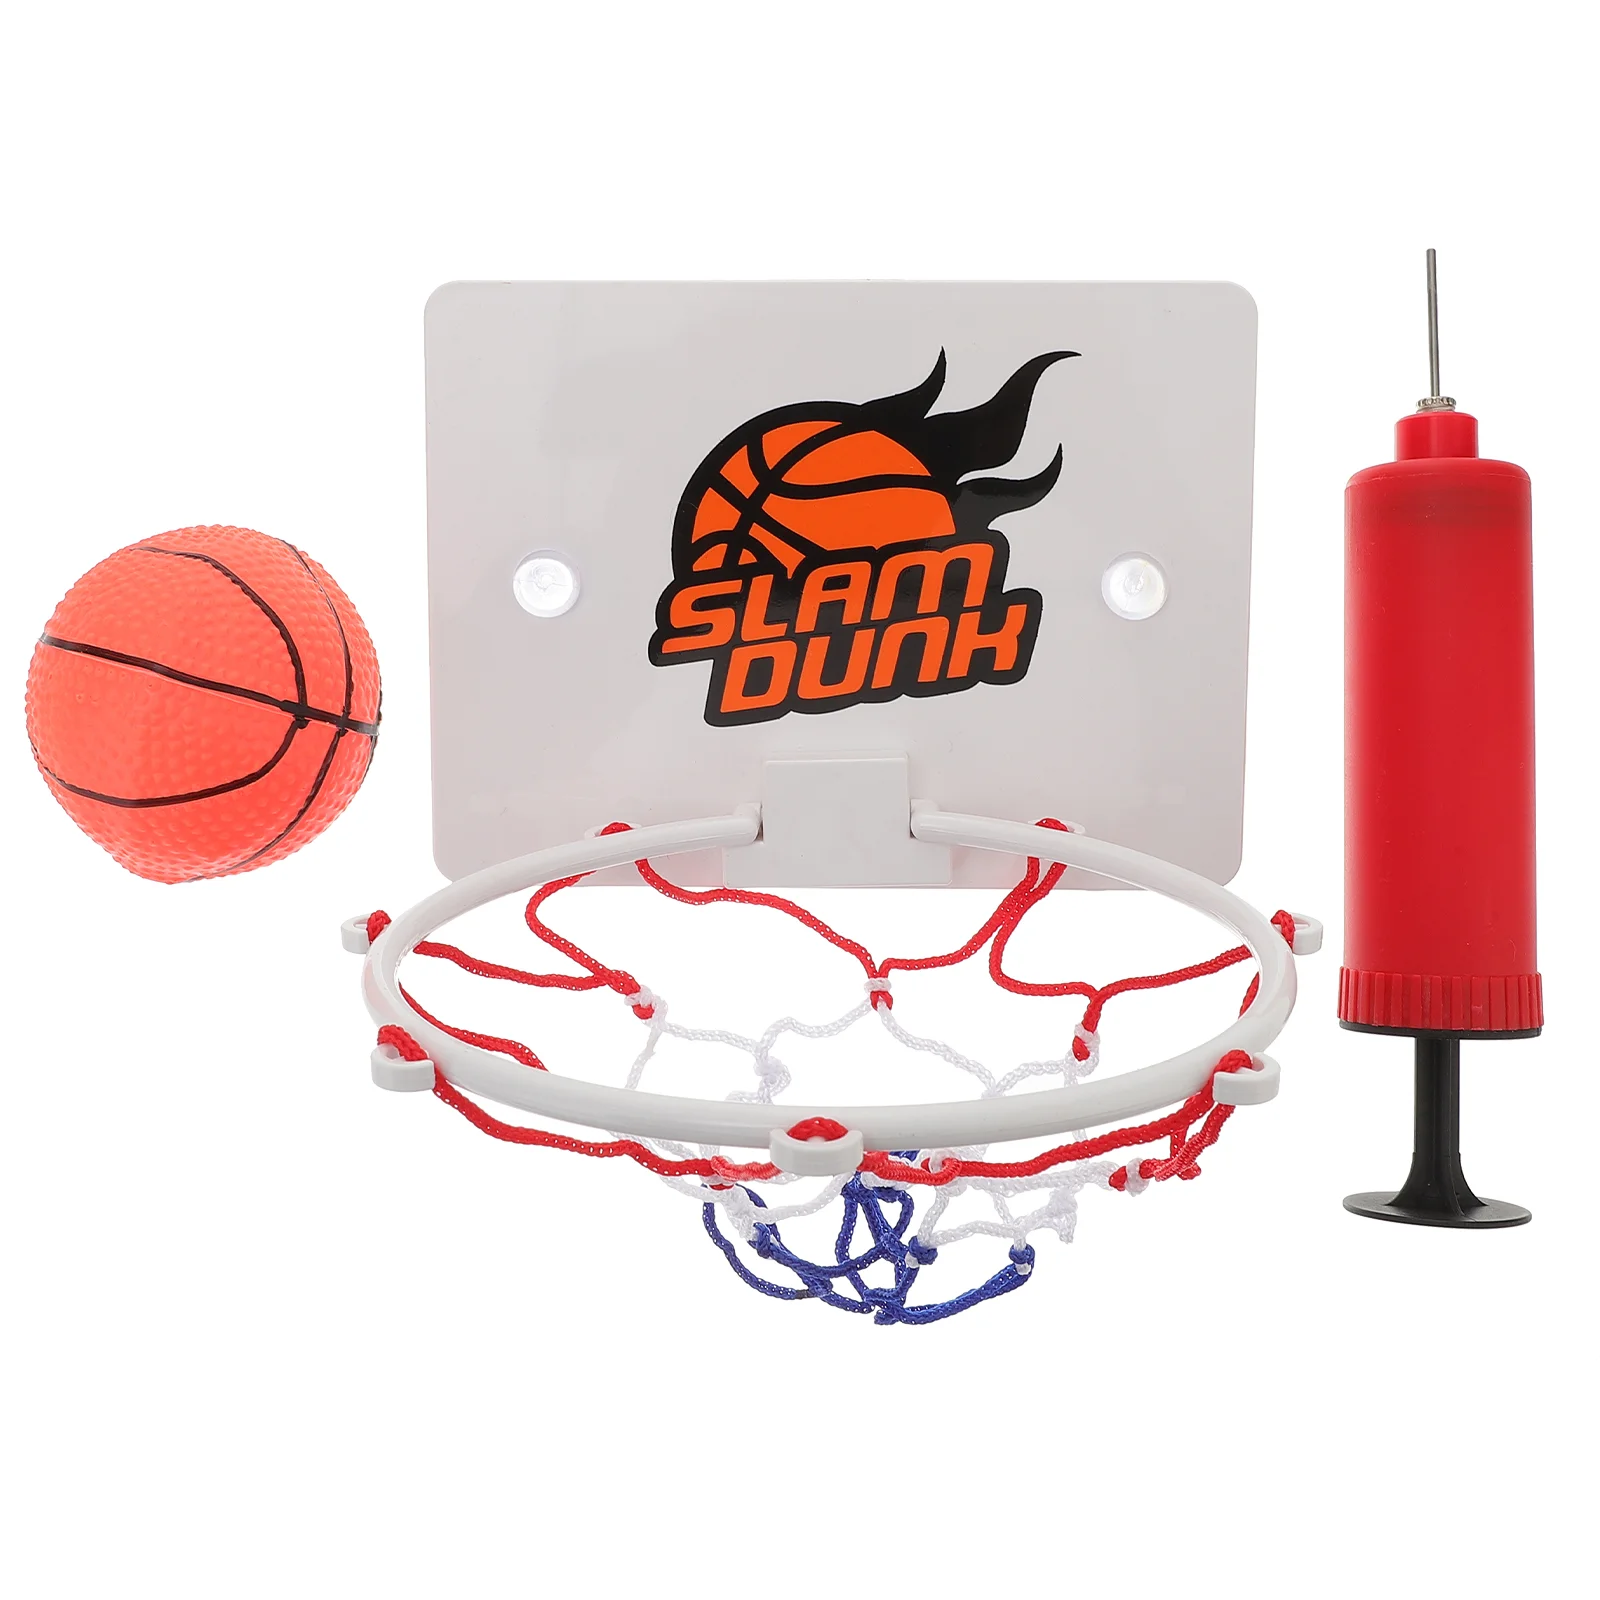 Basketball Over the Door Basketball Backboard Sports Exercise with Pump and Balls for Basketball Lovers Boys Indoor Outdoor 10pcs lot 600ml sublimation blank sports bottle cup mug with handle printing by dye ink heat mug press diy gift